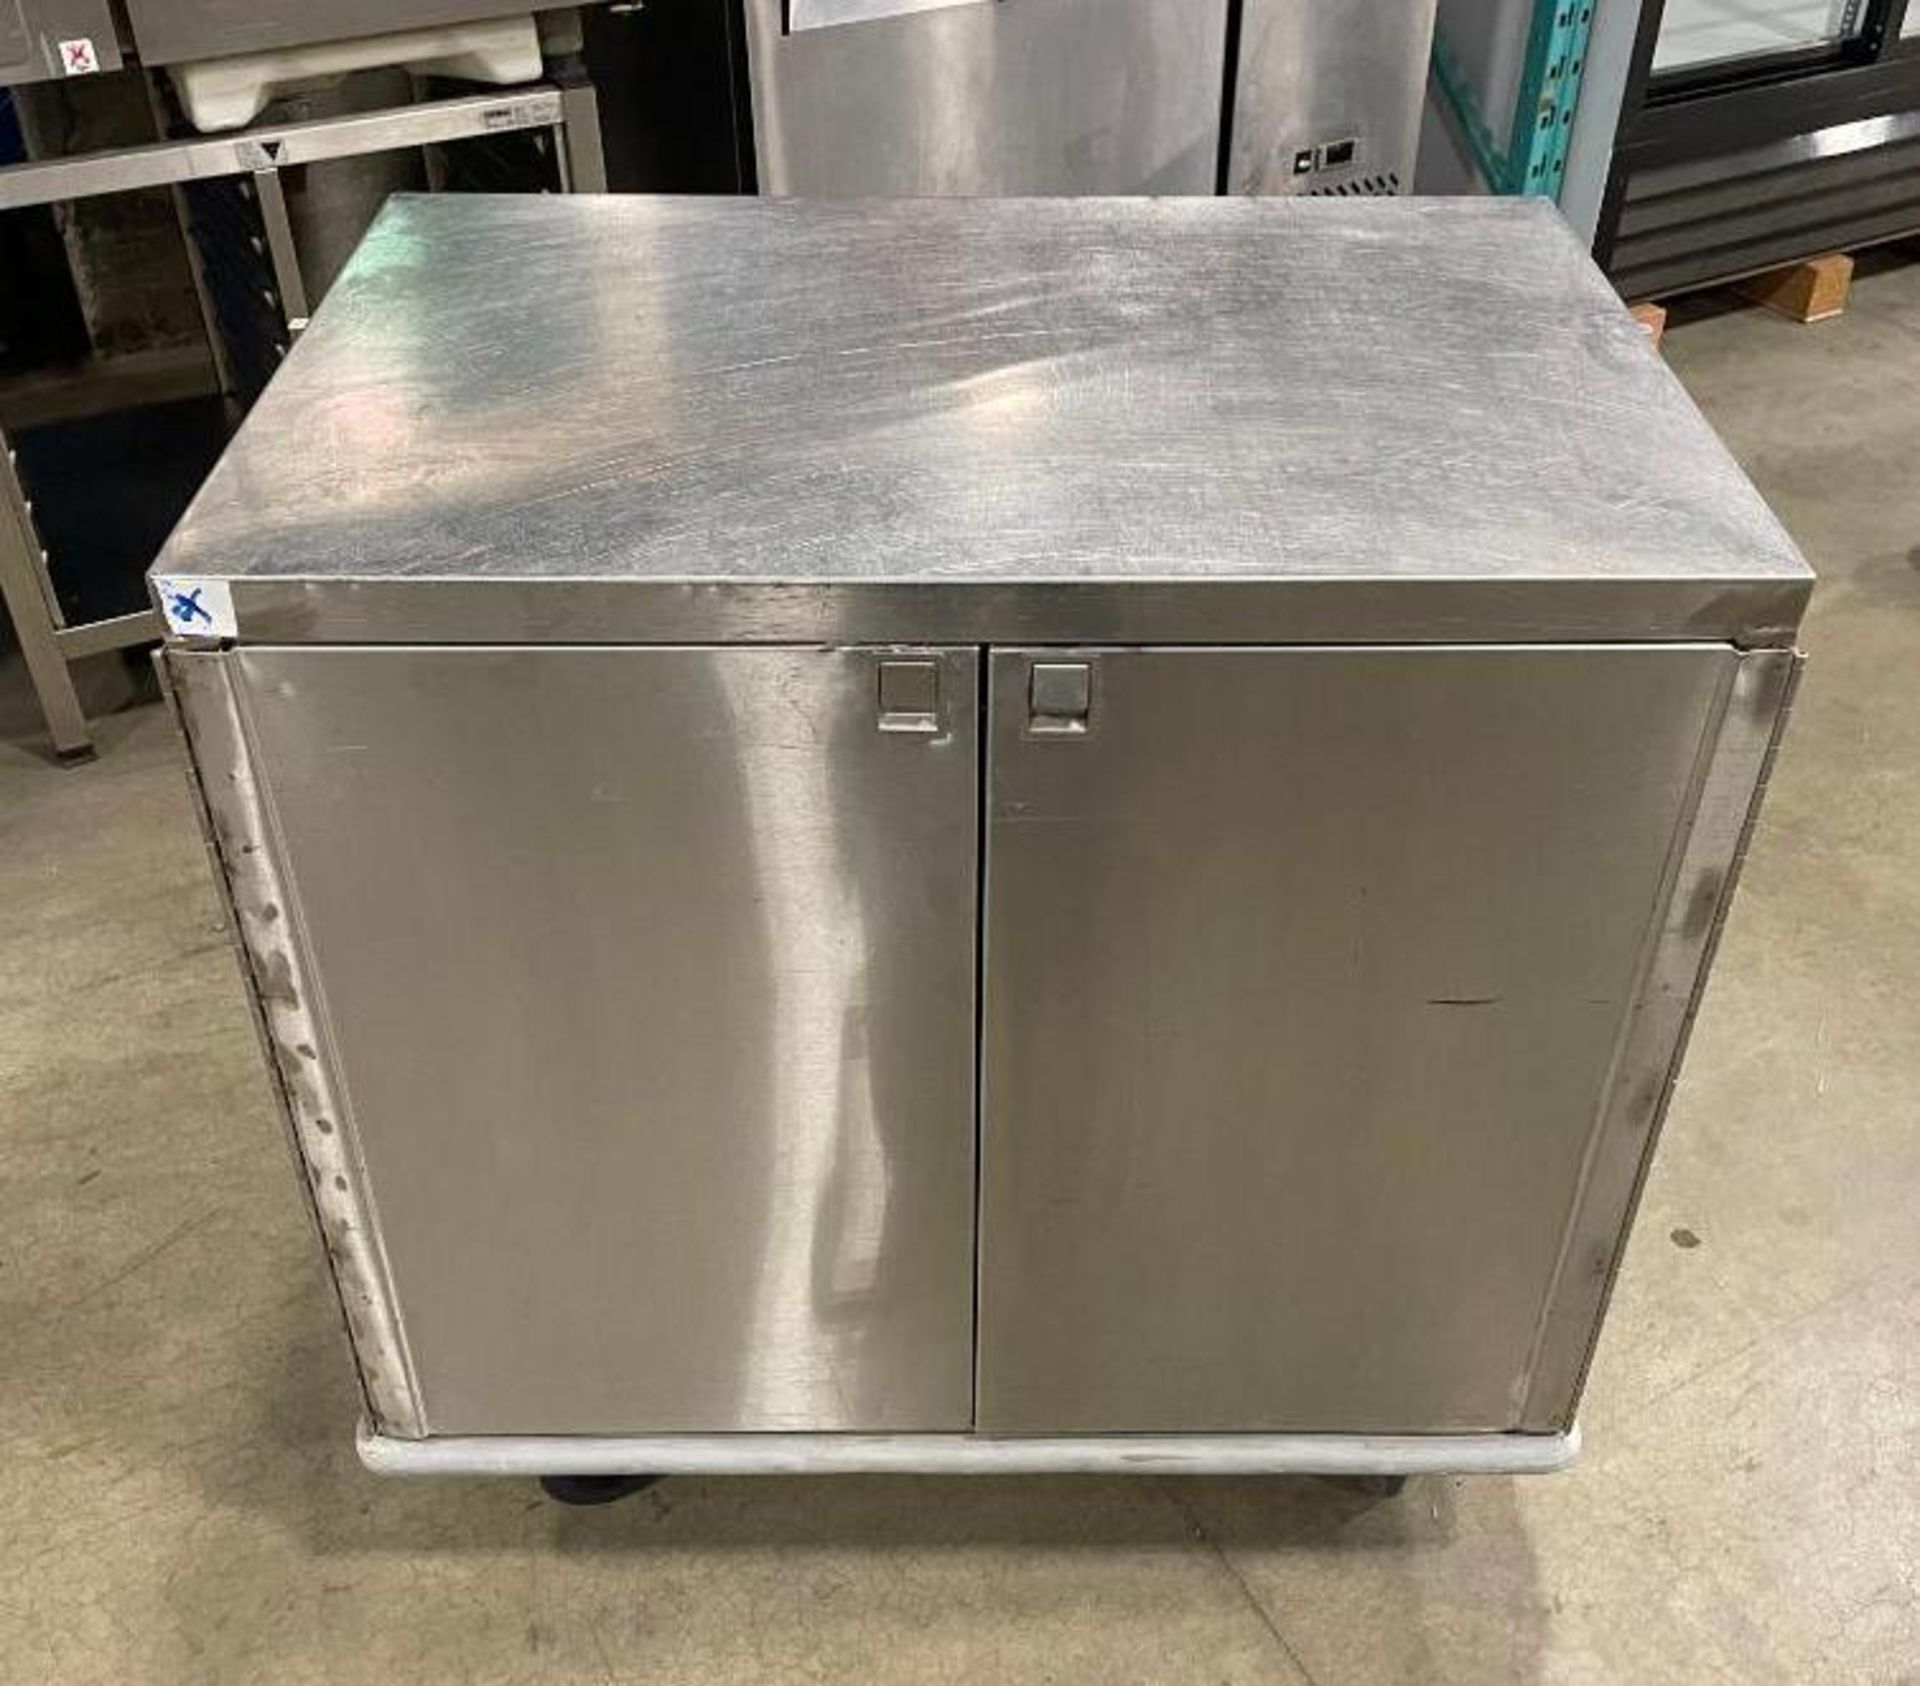 34.5" X 23" STAINLESS STEEL MOBILE CART